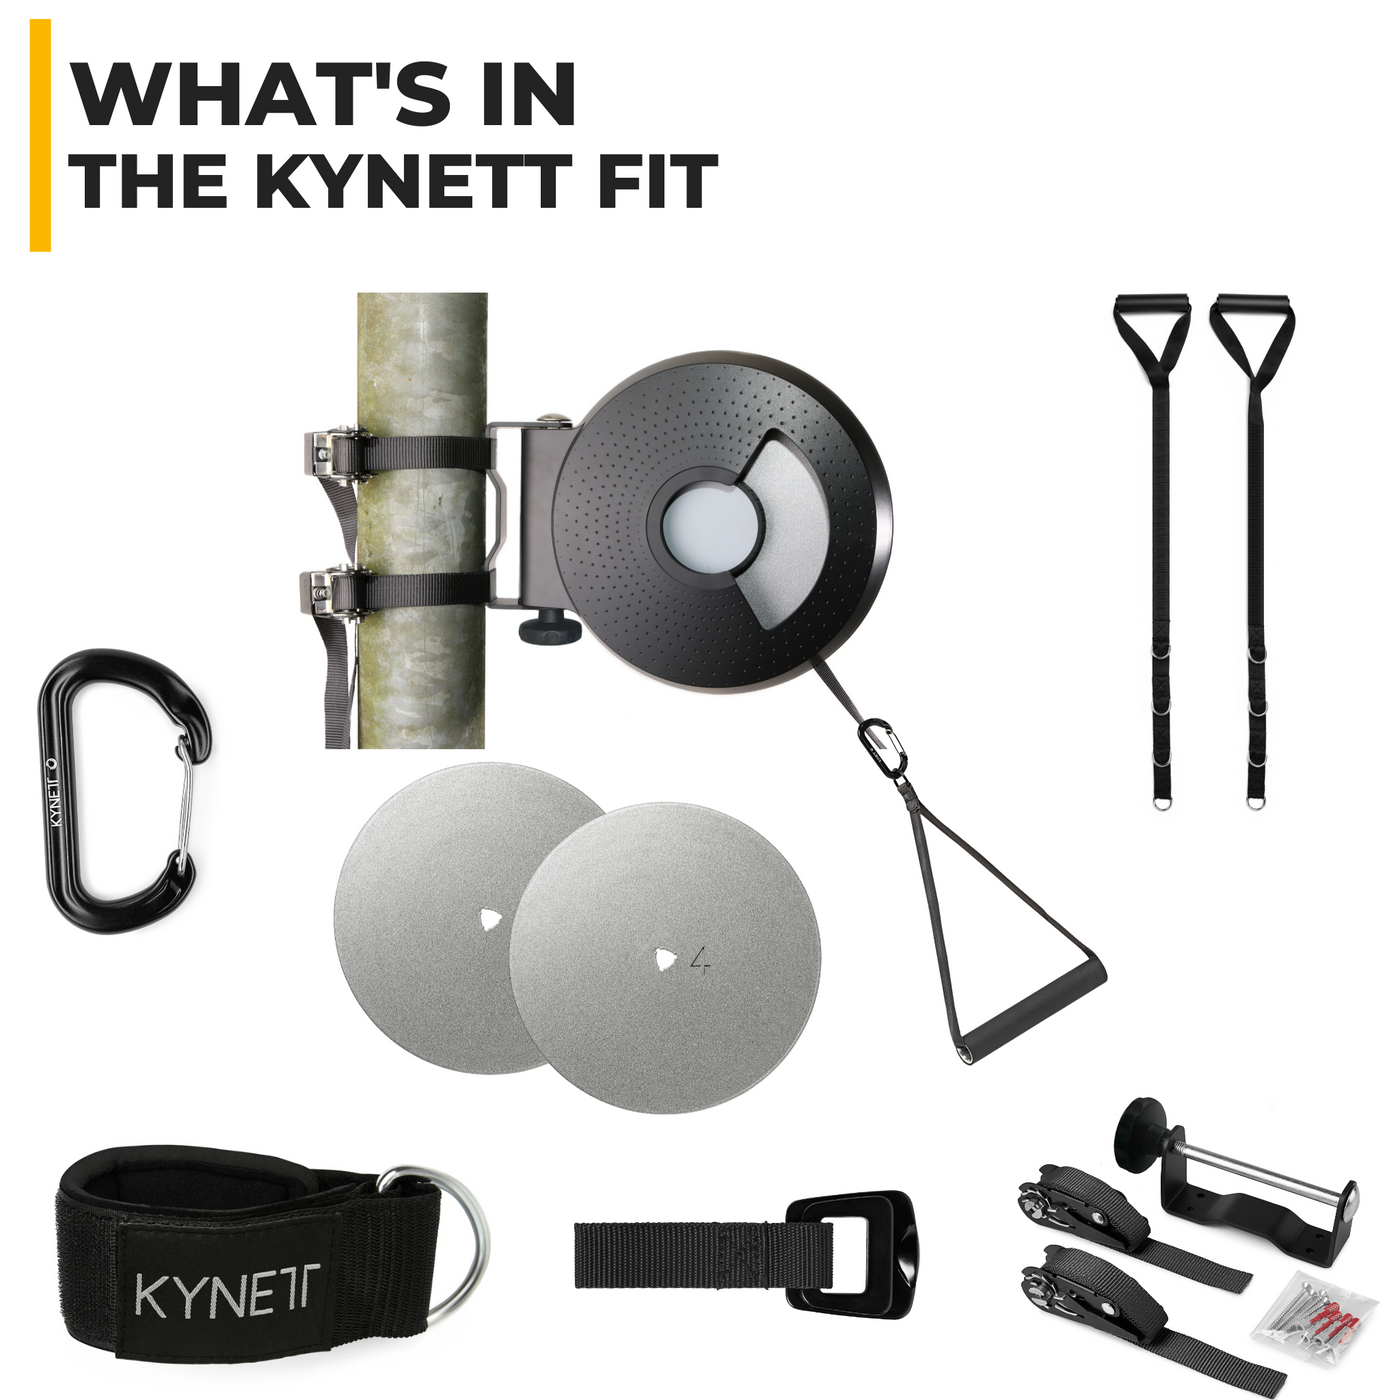 Kynett flywheel training one fly wheel training strength training Kynett home flywheel trainer workout exercise resistance training equipment eccentric overload stick product training box portable affiliate nadal arms eccentric training device inertia training squat machine isoinertial training workout stick rafael nadal muscles rafa nadal flywheel gym equipment pulley price